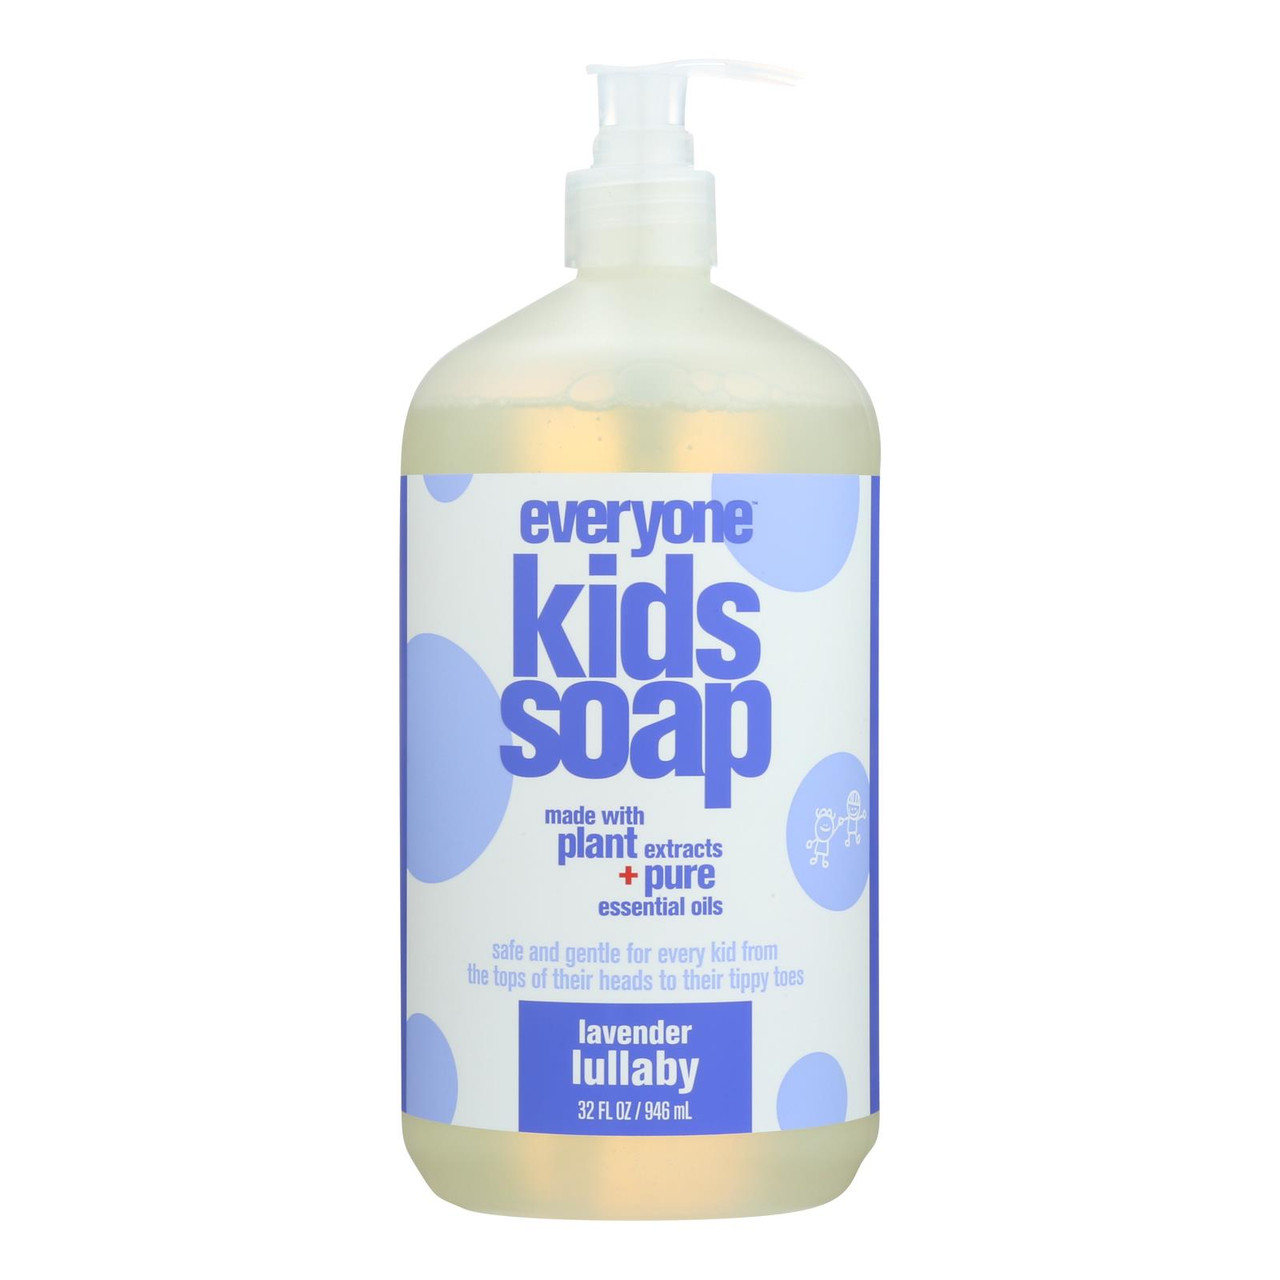 EO Products Everyone Soap For Every Kids, Orange Squeeze - 32 oz